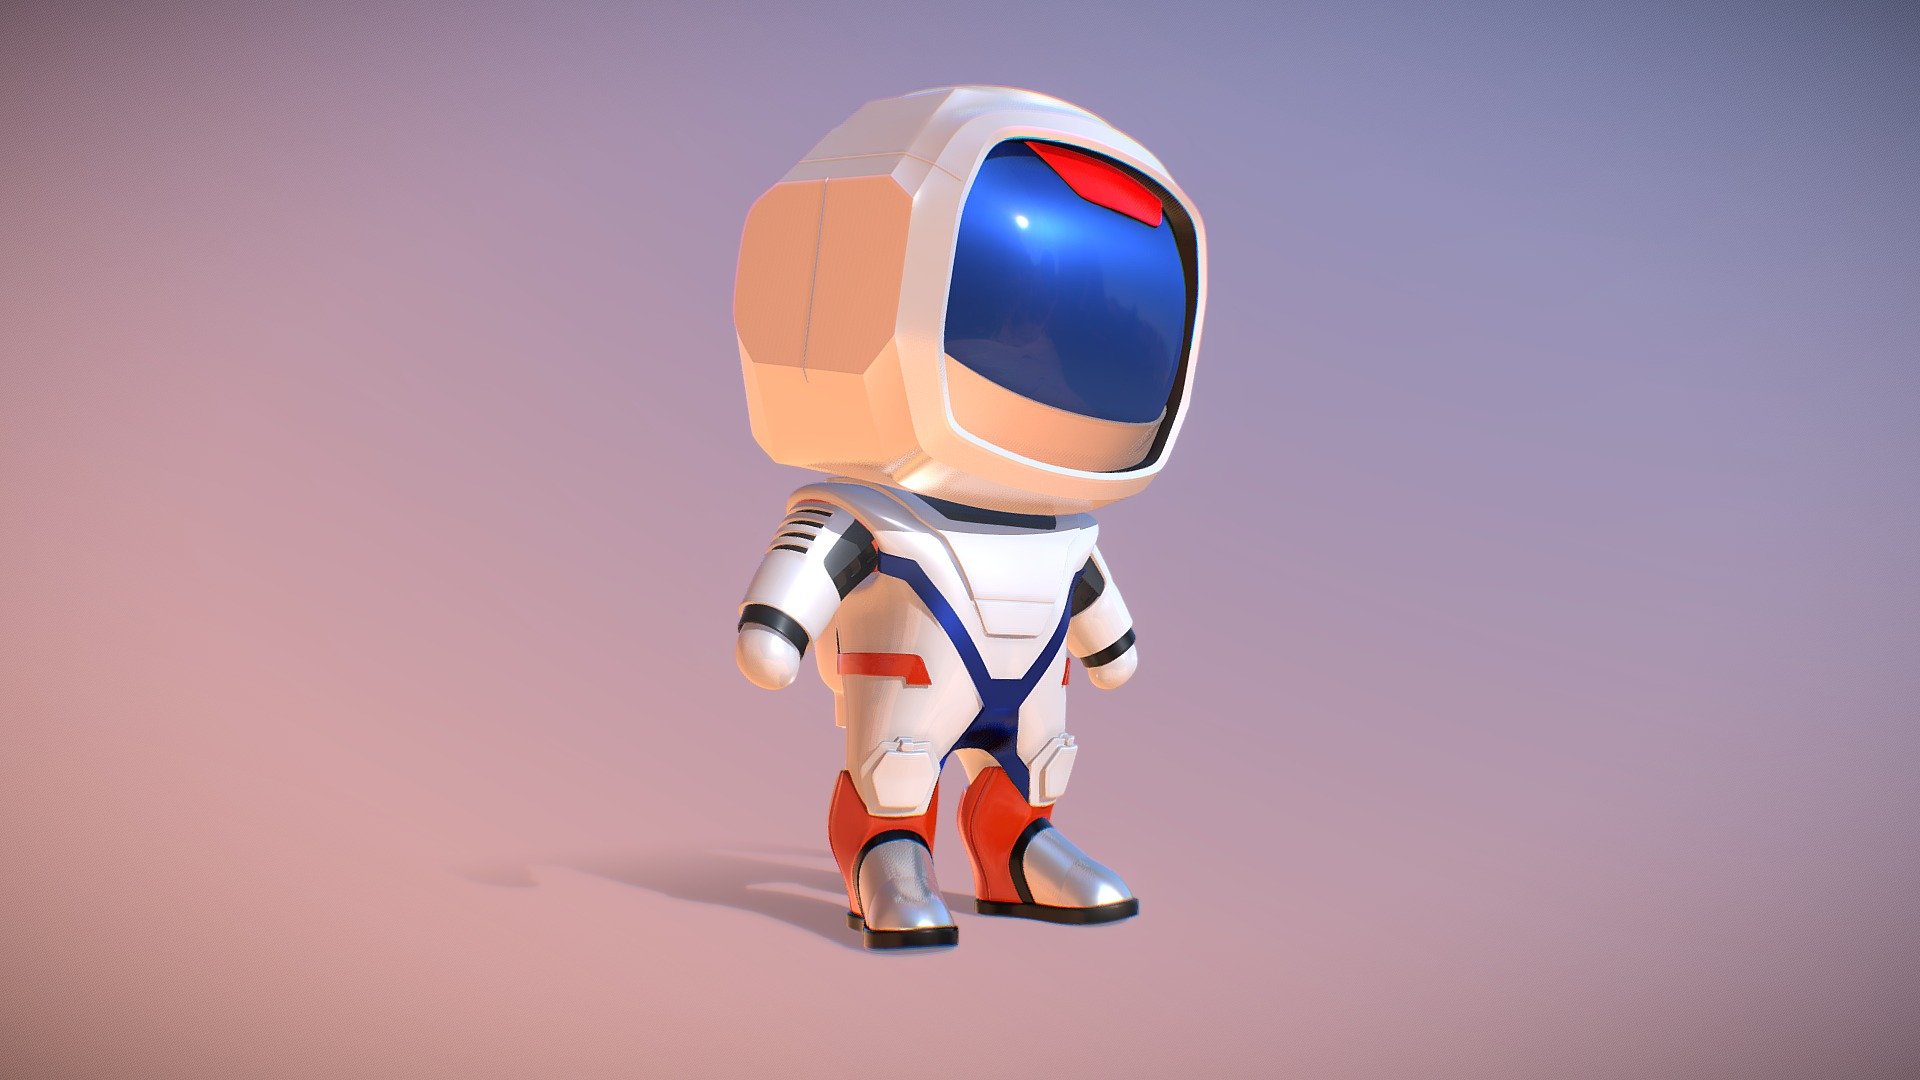 Wip a personal project about an stylized kid size astronaut character that will explore the surface of Mars with jet pack technology on a future iteration 3d model